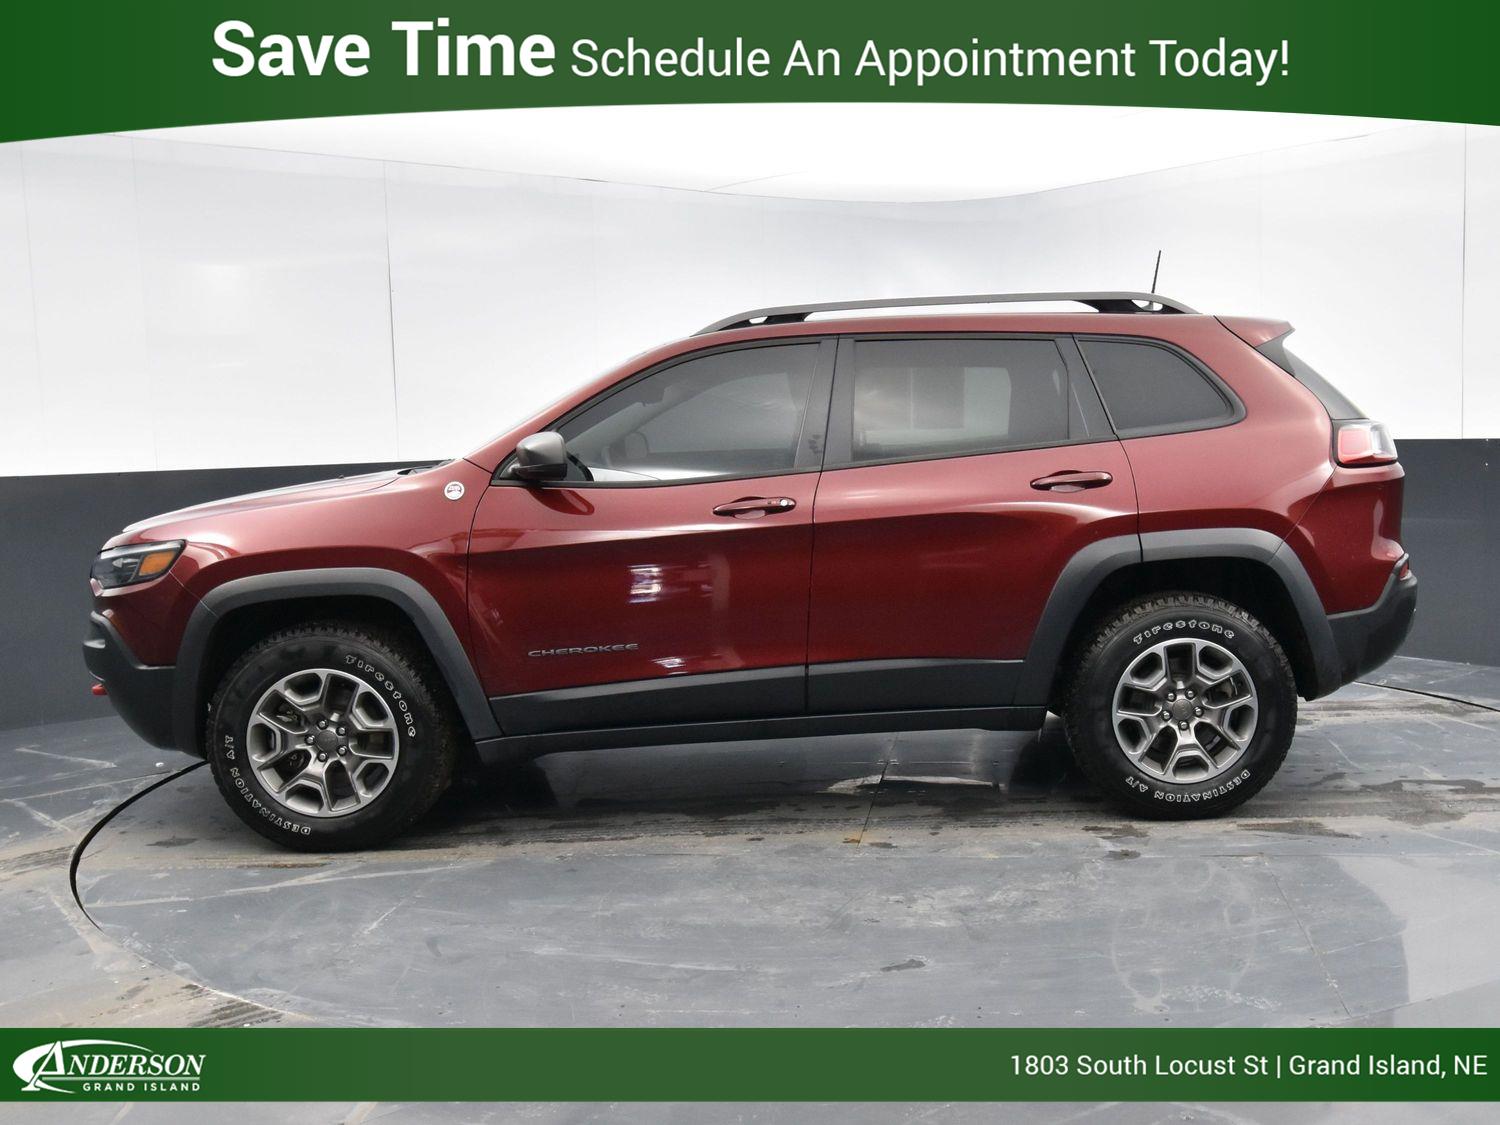 Used 2020 Jeep Cherokee Trailhawk Stock: 13001439